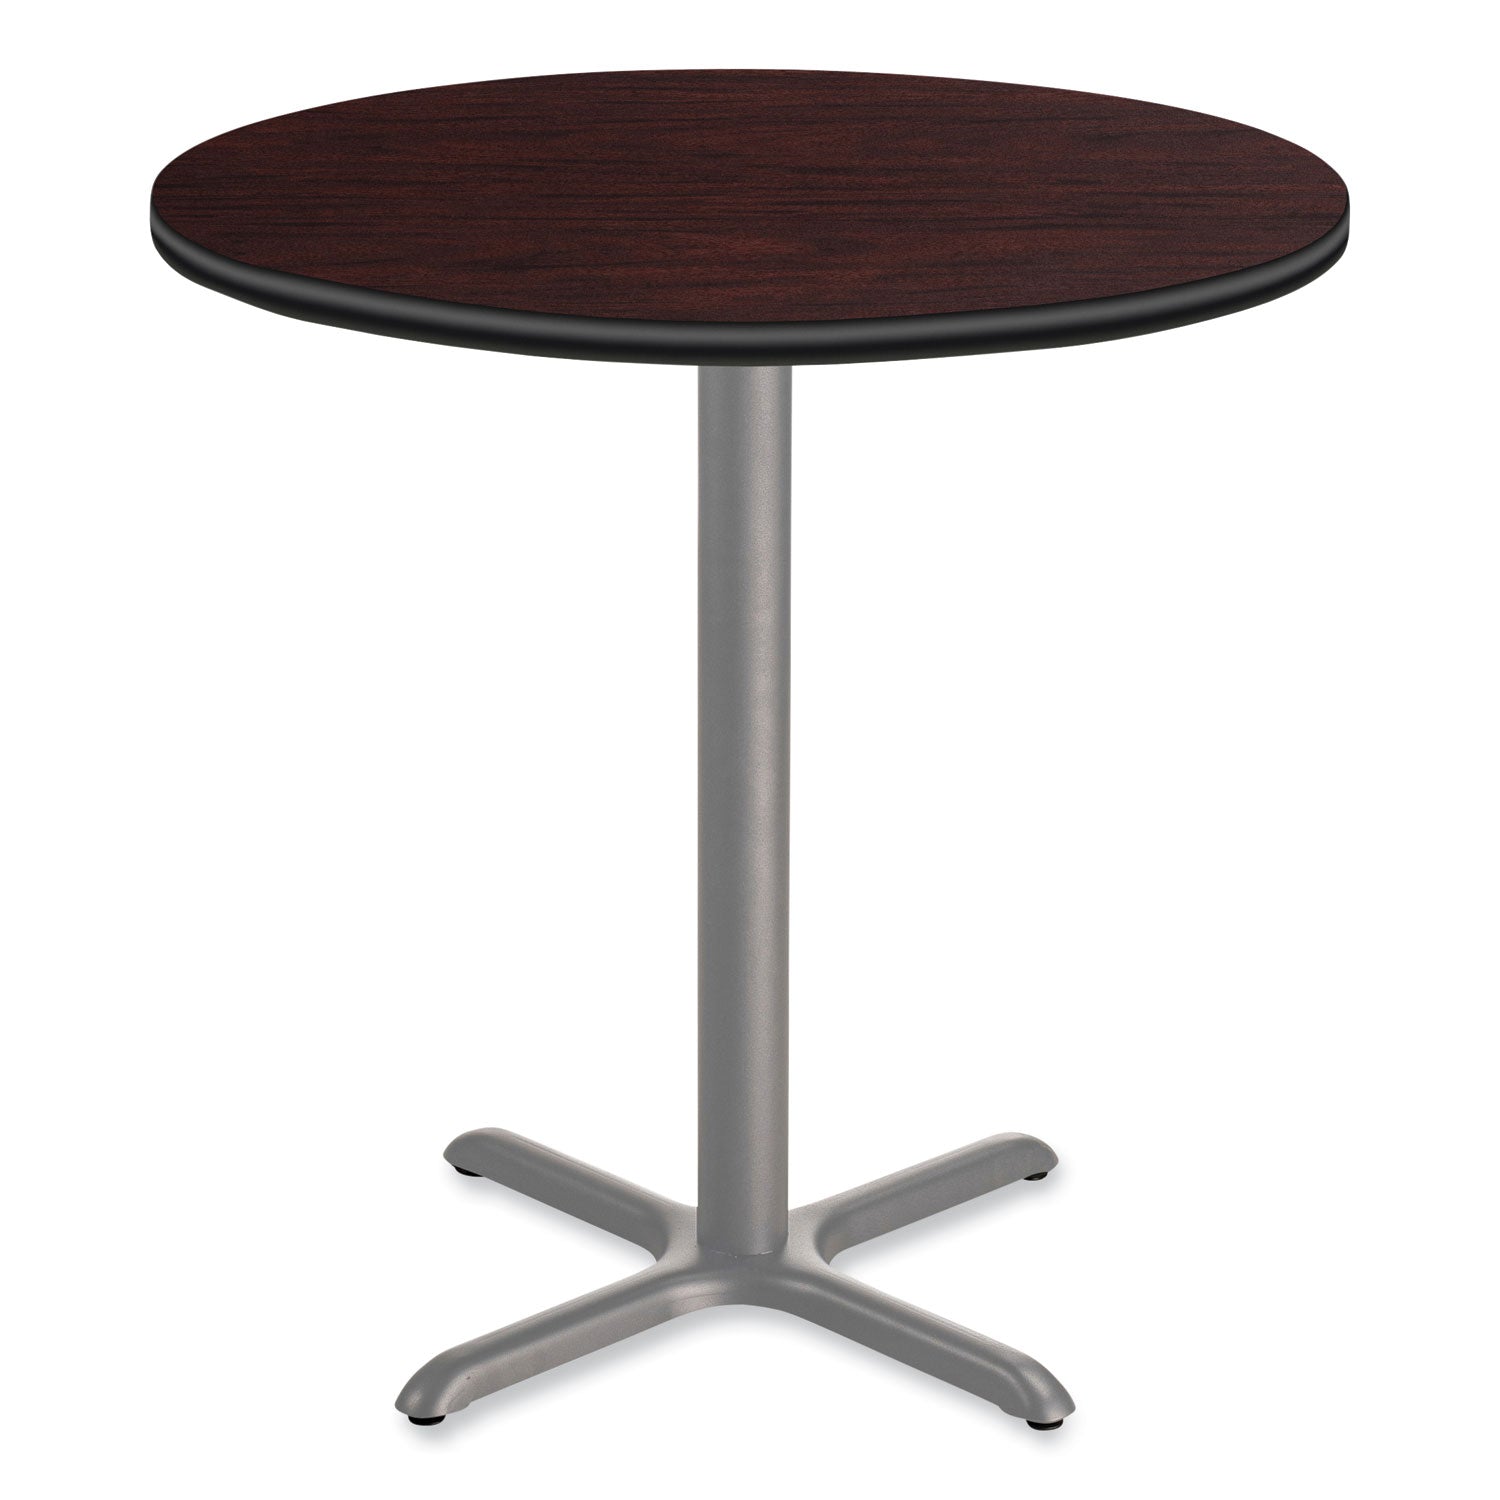 cafe-table-36-diameter-x-36h-round-top-x-base-mahogany-top-gray-base-ships-in-7-10-business-days_npscg13636xc1my - 1